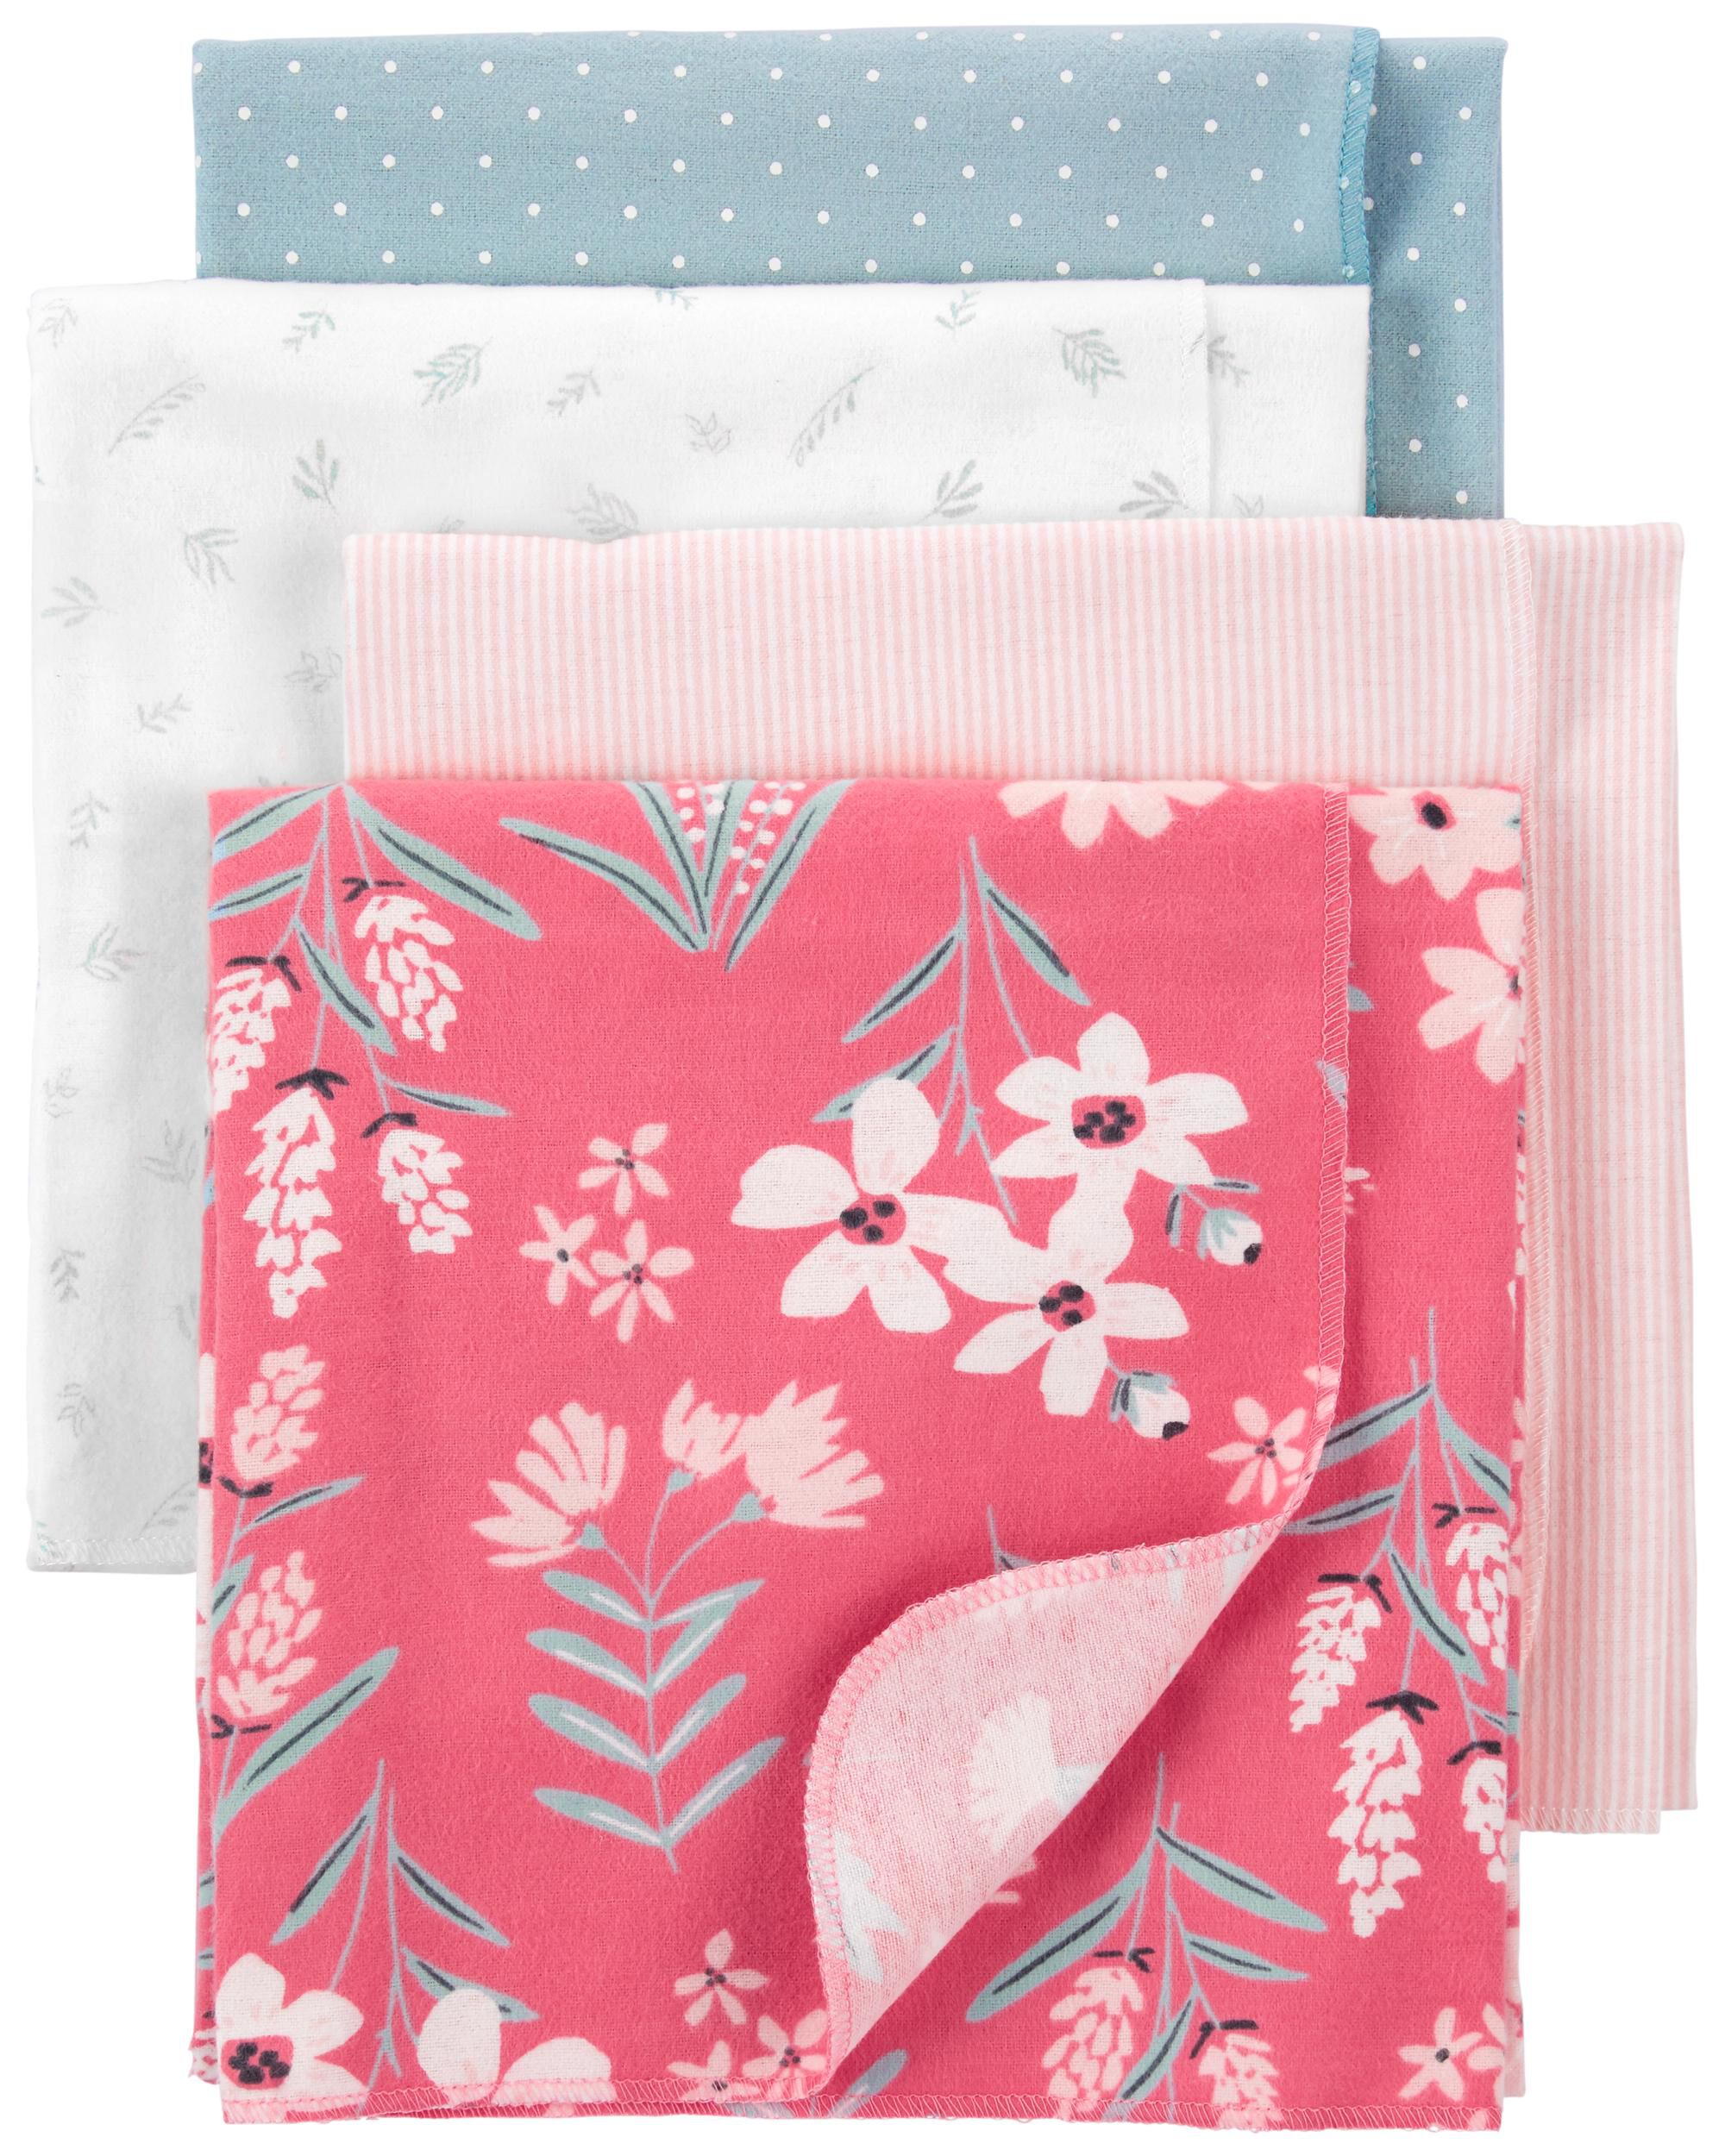 Carter's 4 Pack Baby 100% cotton Flannel Receiving Blanket 30"x40" Boys Girls NW 